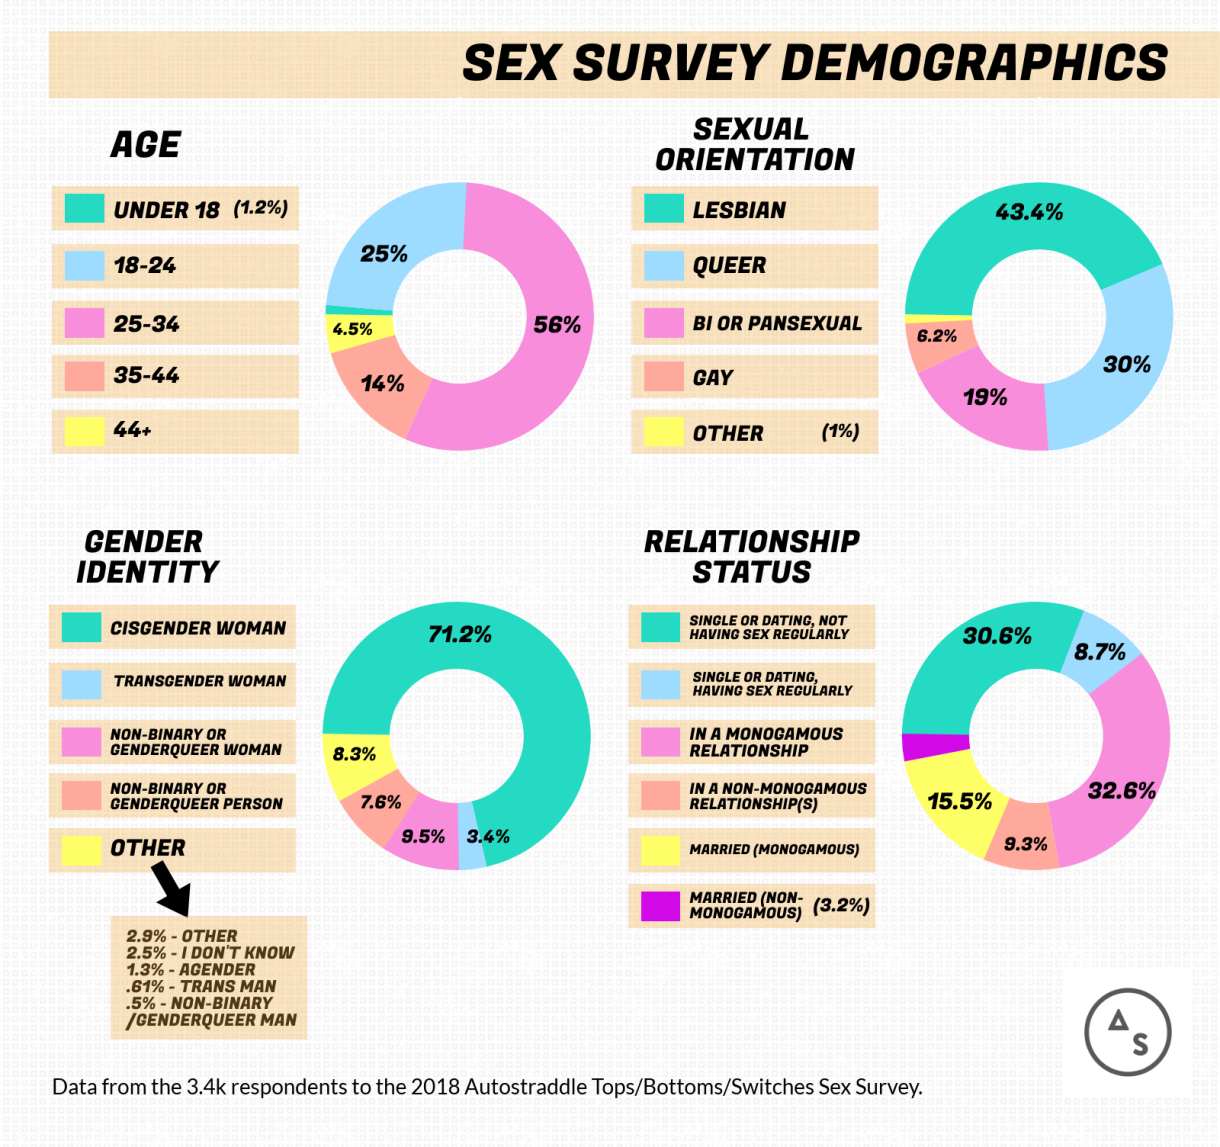 Sex Survey Demographics = Age: Under 18 (1.2%) 18-24 (25%), 25-34 (56%), 35-44 (14%), 44+ (4.5%) // Sexual Orientation: Lesbian (43.4%), Queer (30%), Bi or Pansexual (19%), Gay (6.2%), Other (1%) // Gender Identity: Cisgender Woman (71.2%), Transgender Woman (3.4%), Non-Binary or Genderqueer Person (7.8%), Other (8.3%) // Relationship Status: Single or Dating, Not Having Sex Regularly (30.6%), Single or Dating, Having Sex Regularly (8.7%), In a Monogamous Relationship (32.6%), In a Non-Monogamous Relationship(s) (9.3%), Married & Monogamous (15.5%), Married & Non-Monogamous (3.2%)